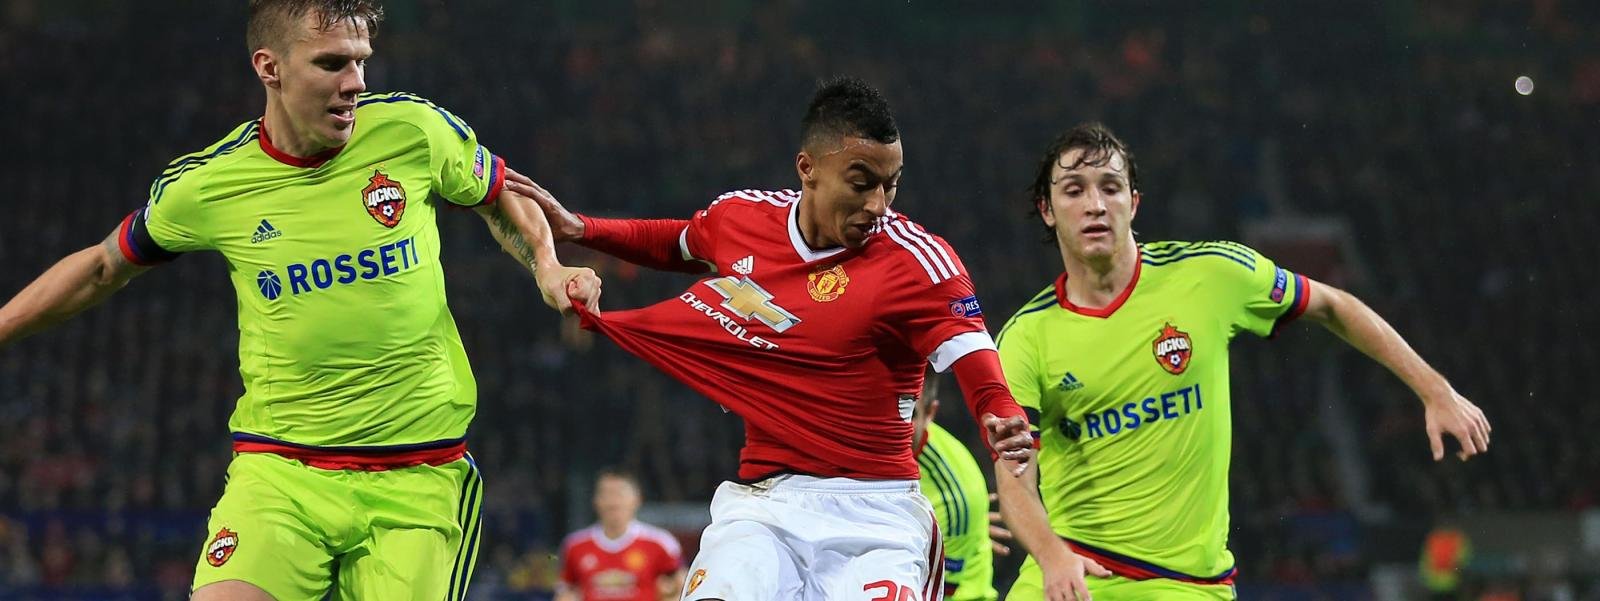 Spotlight on Manchester United’s young Fantastic Four